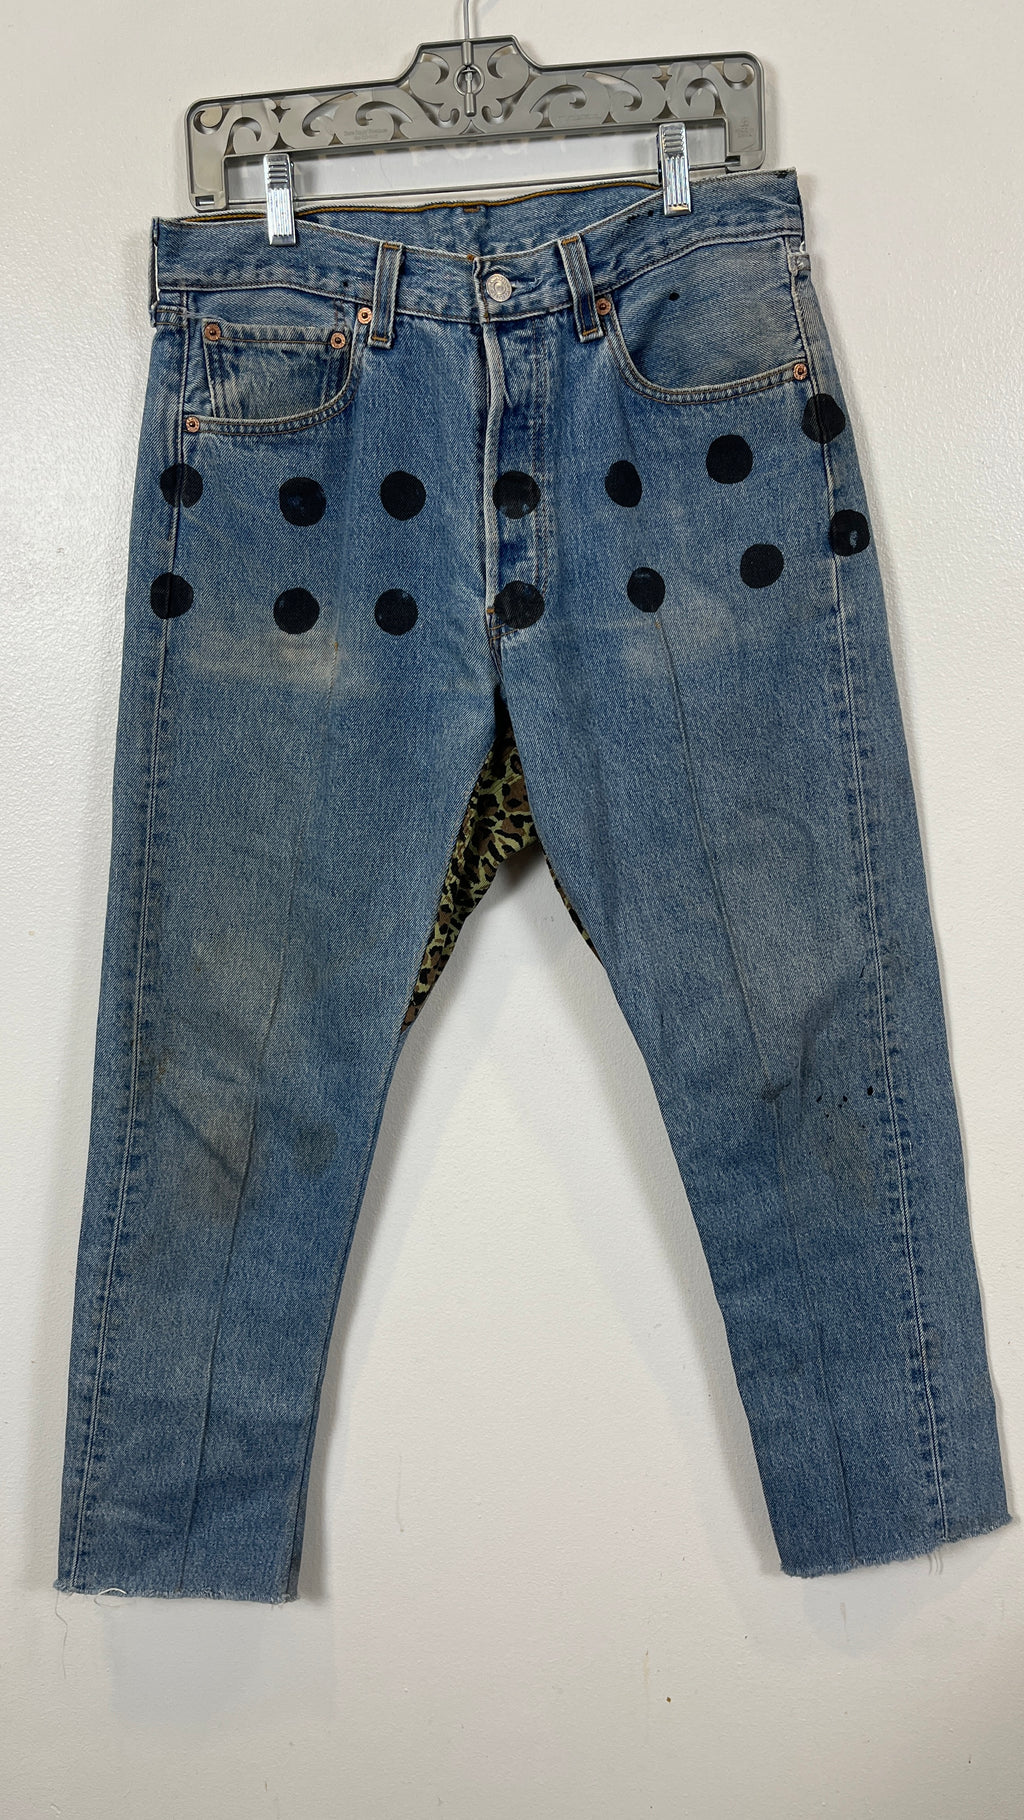 Rth Polka Dot Distressed Levis Jeans